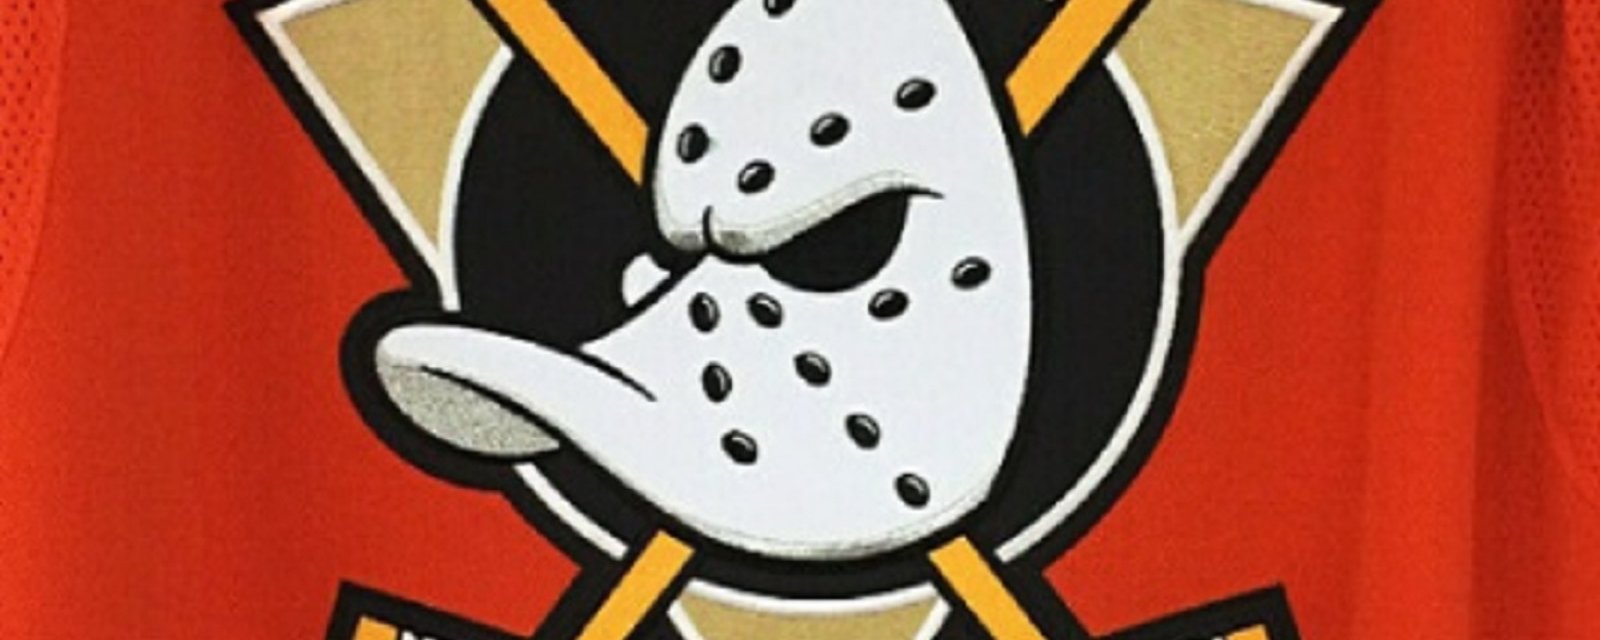 Leaked images of new Ducks jersey shows the “Mighty Ducks” logo.